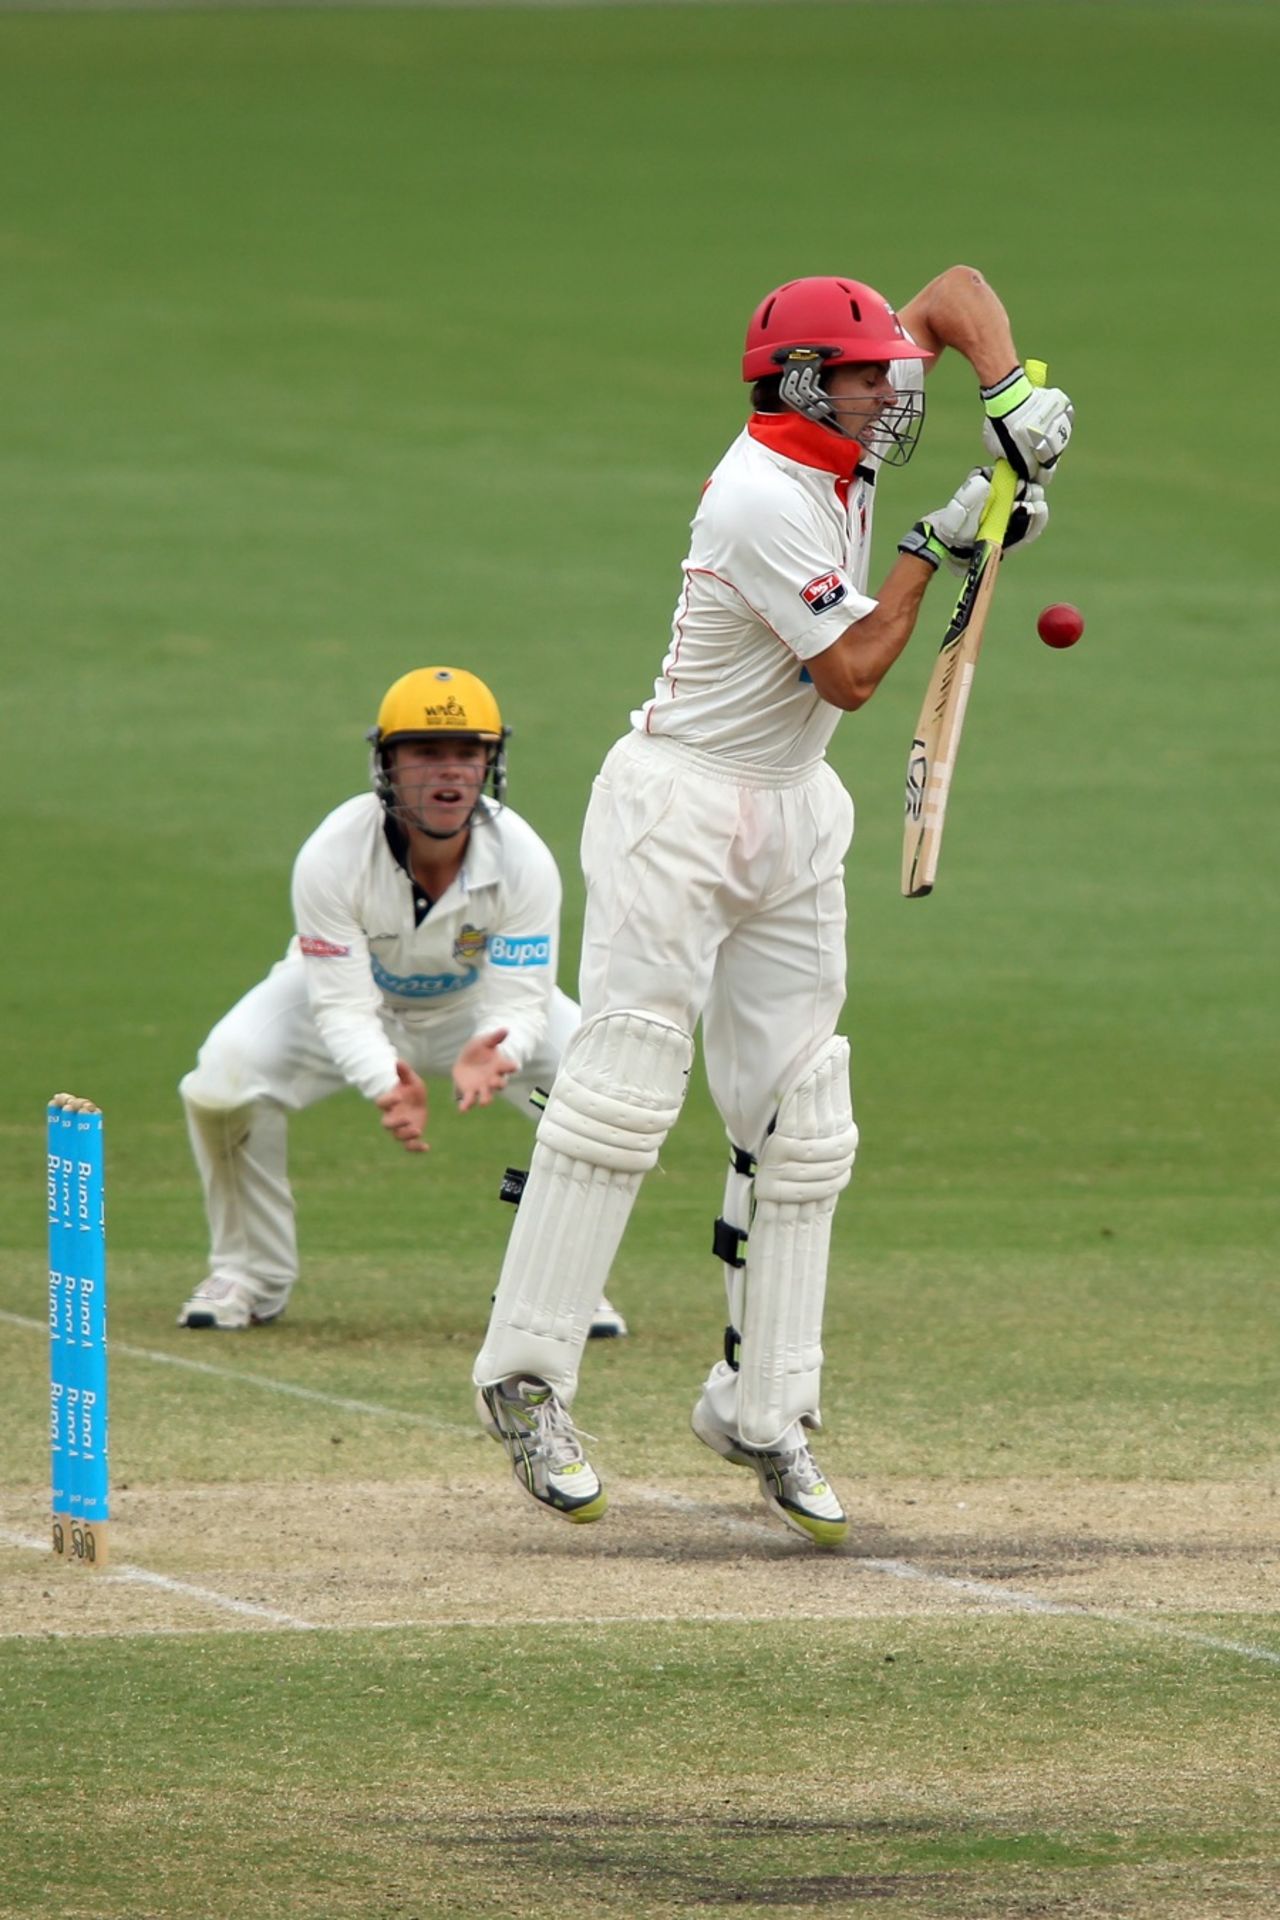 Cullen Bailey defends on the back foot, South Australia v Western Australia, Sheffield Shield, day four, Adelaide, October 28 2011